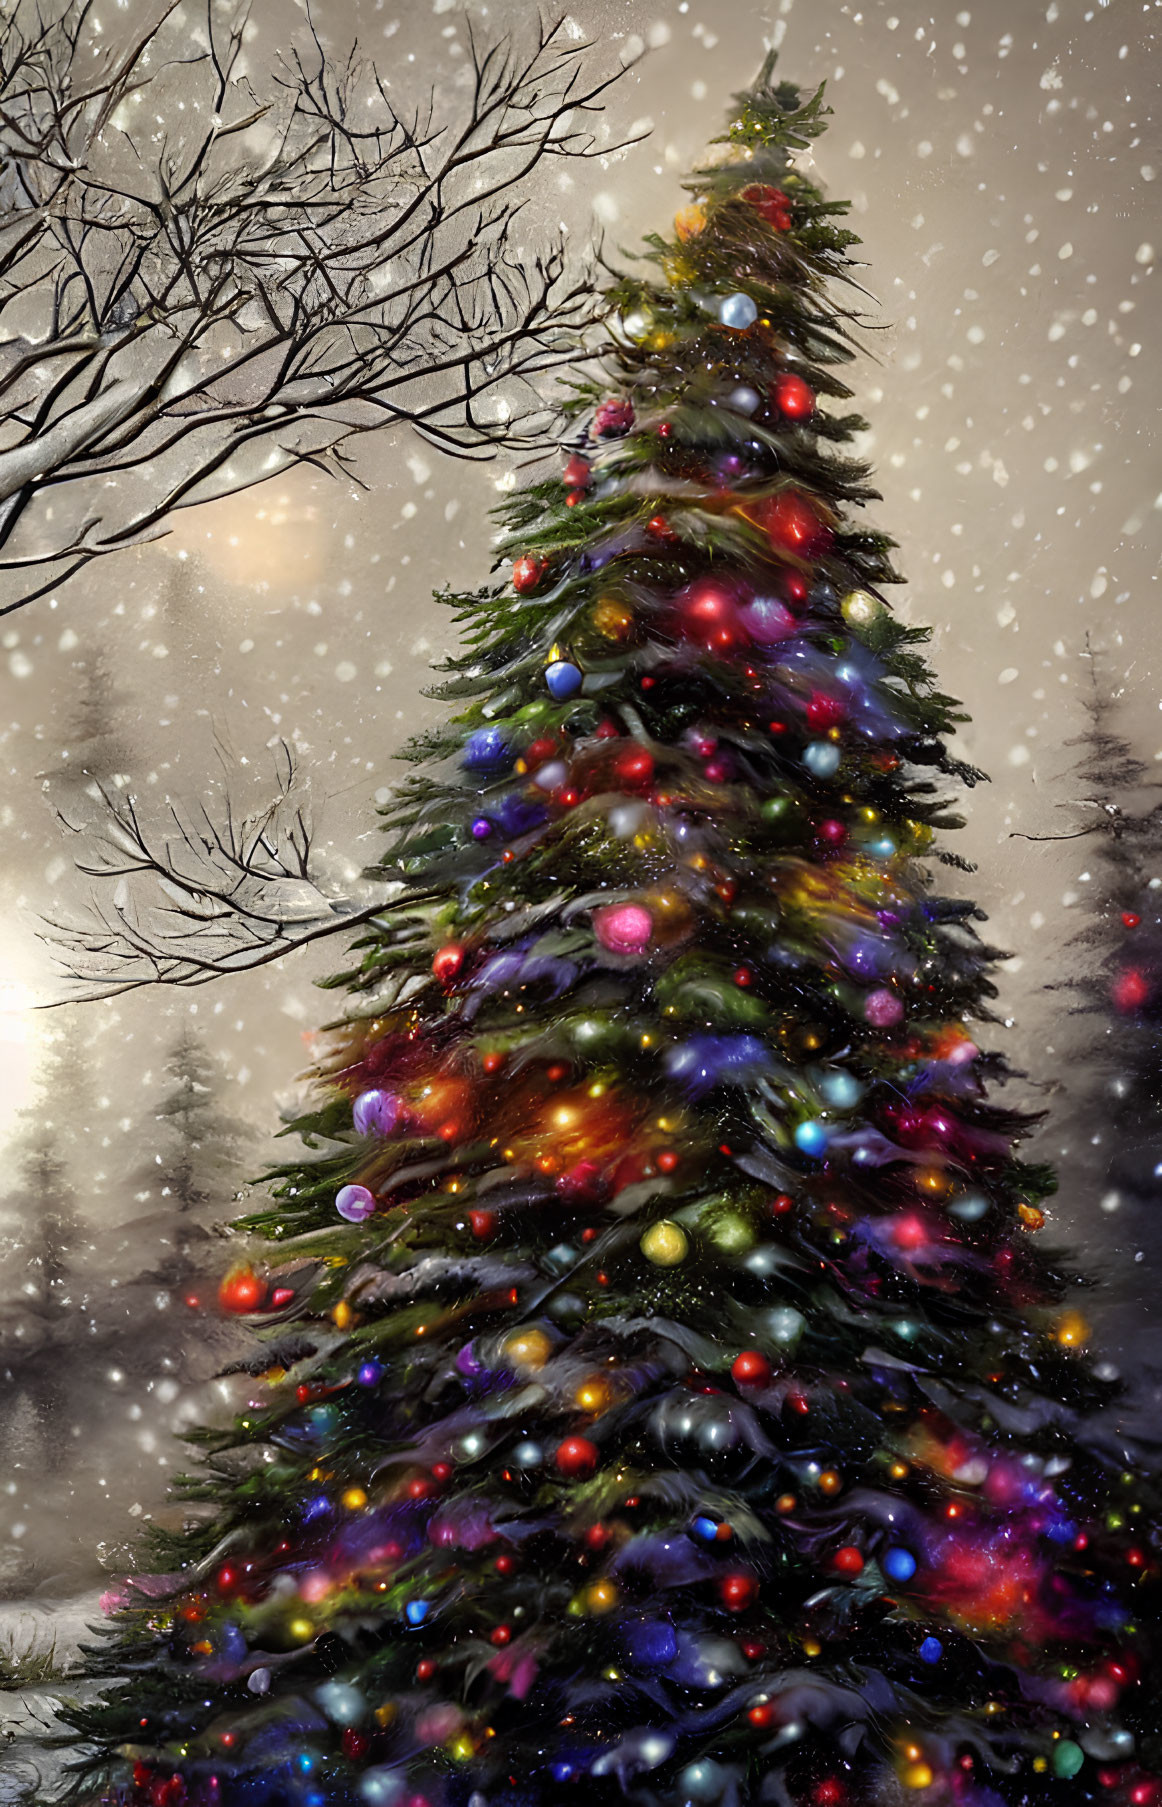 Snowy forest scene: Tall Christmas tree with colorful lights and ornaments under falling snowflakes